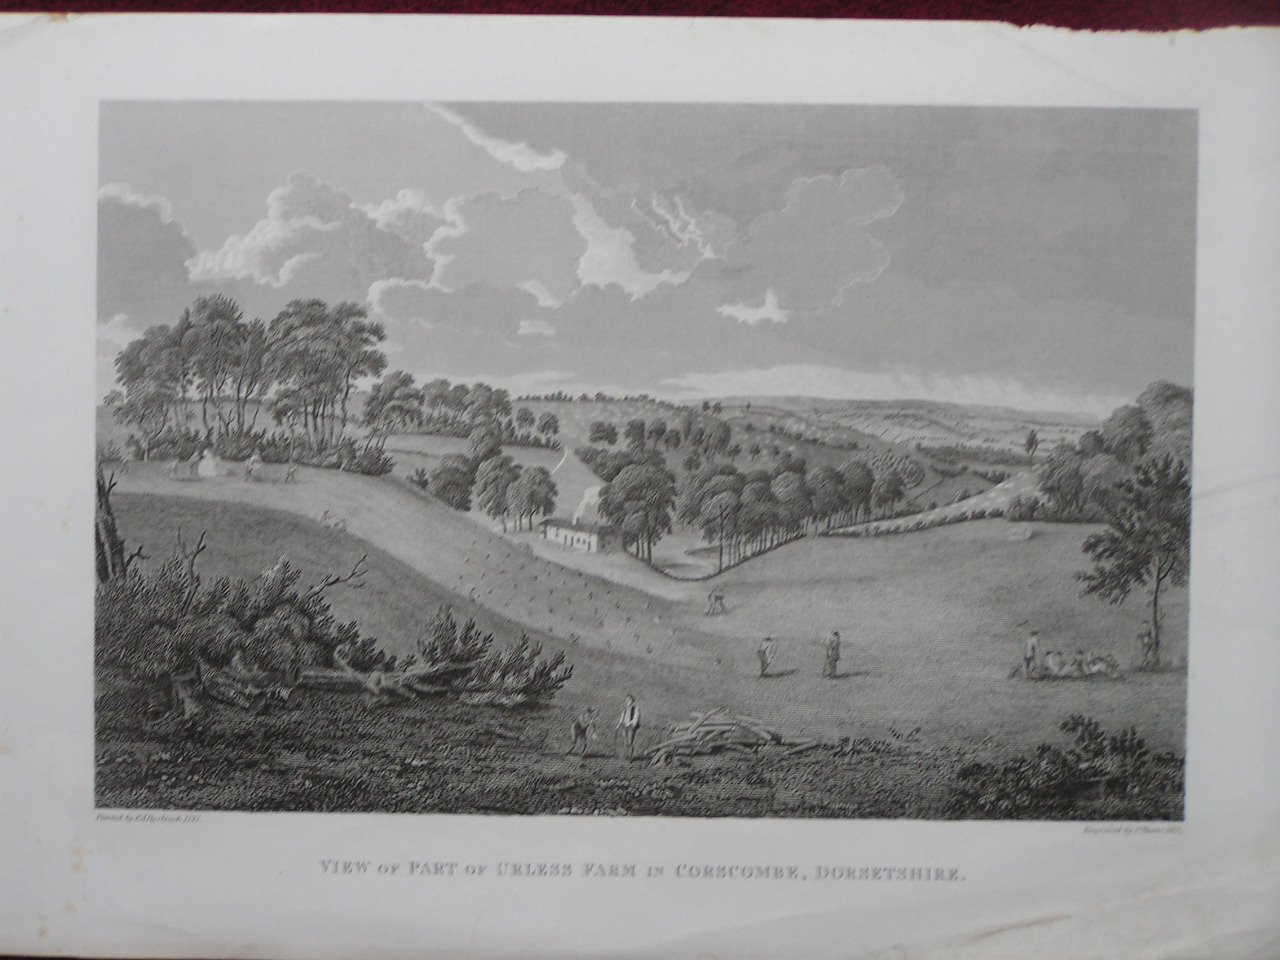 Print - View of Part of Urless Farm in Corscombe, Dorsetshire. - Basire